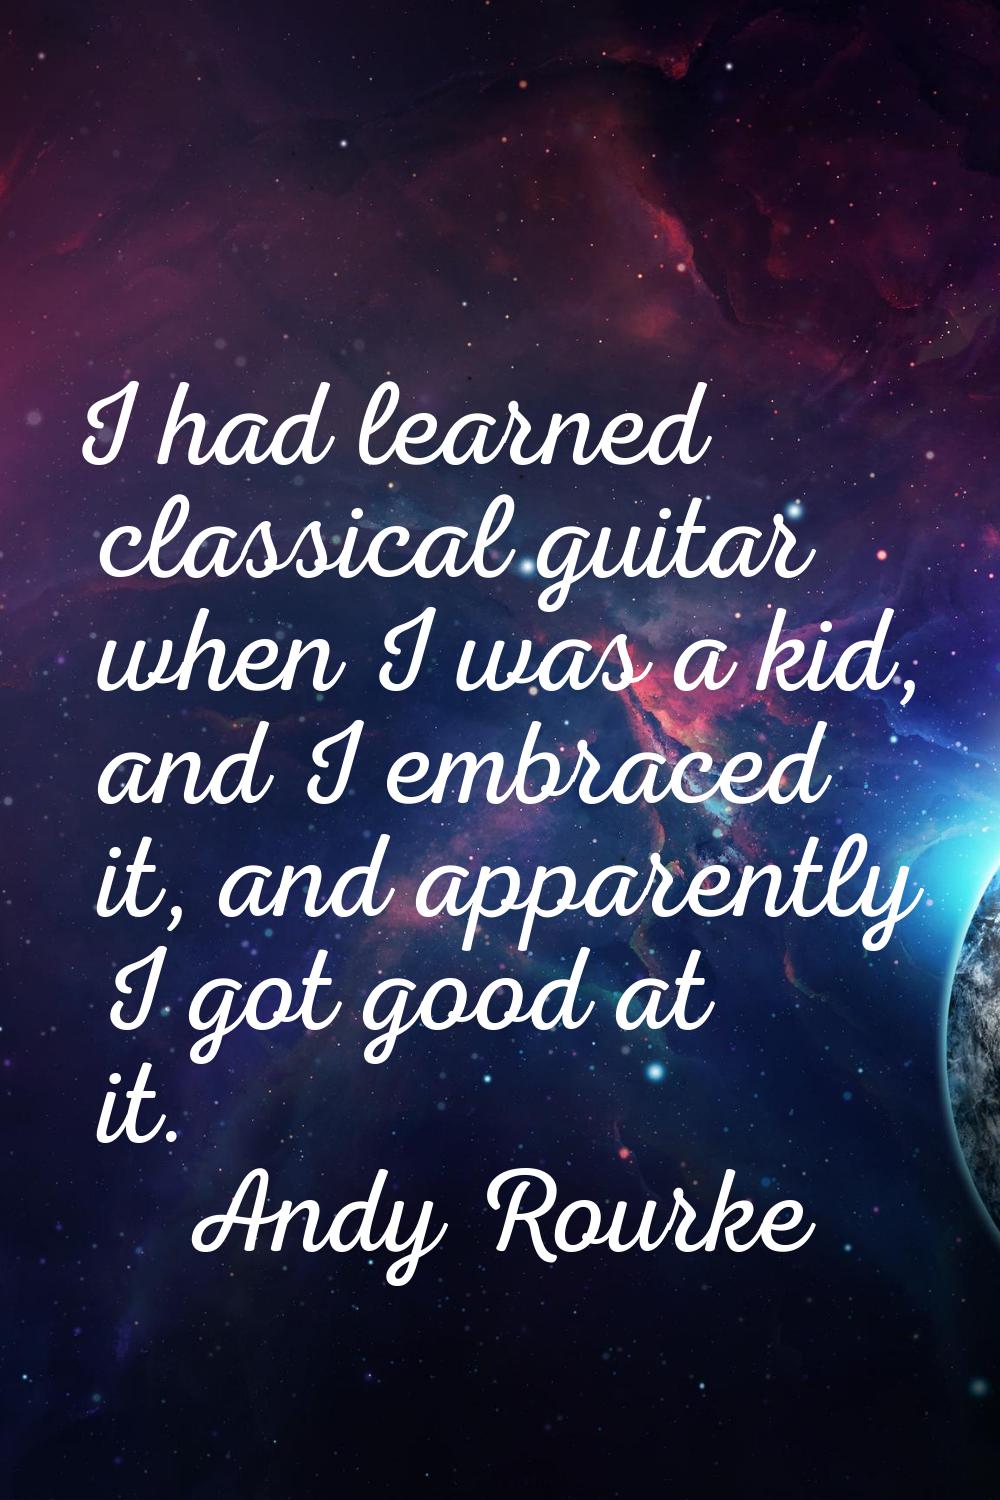 I had learned classical guitar when I was a kid, and I embraced it, and apparently I got good at it